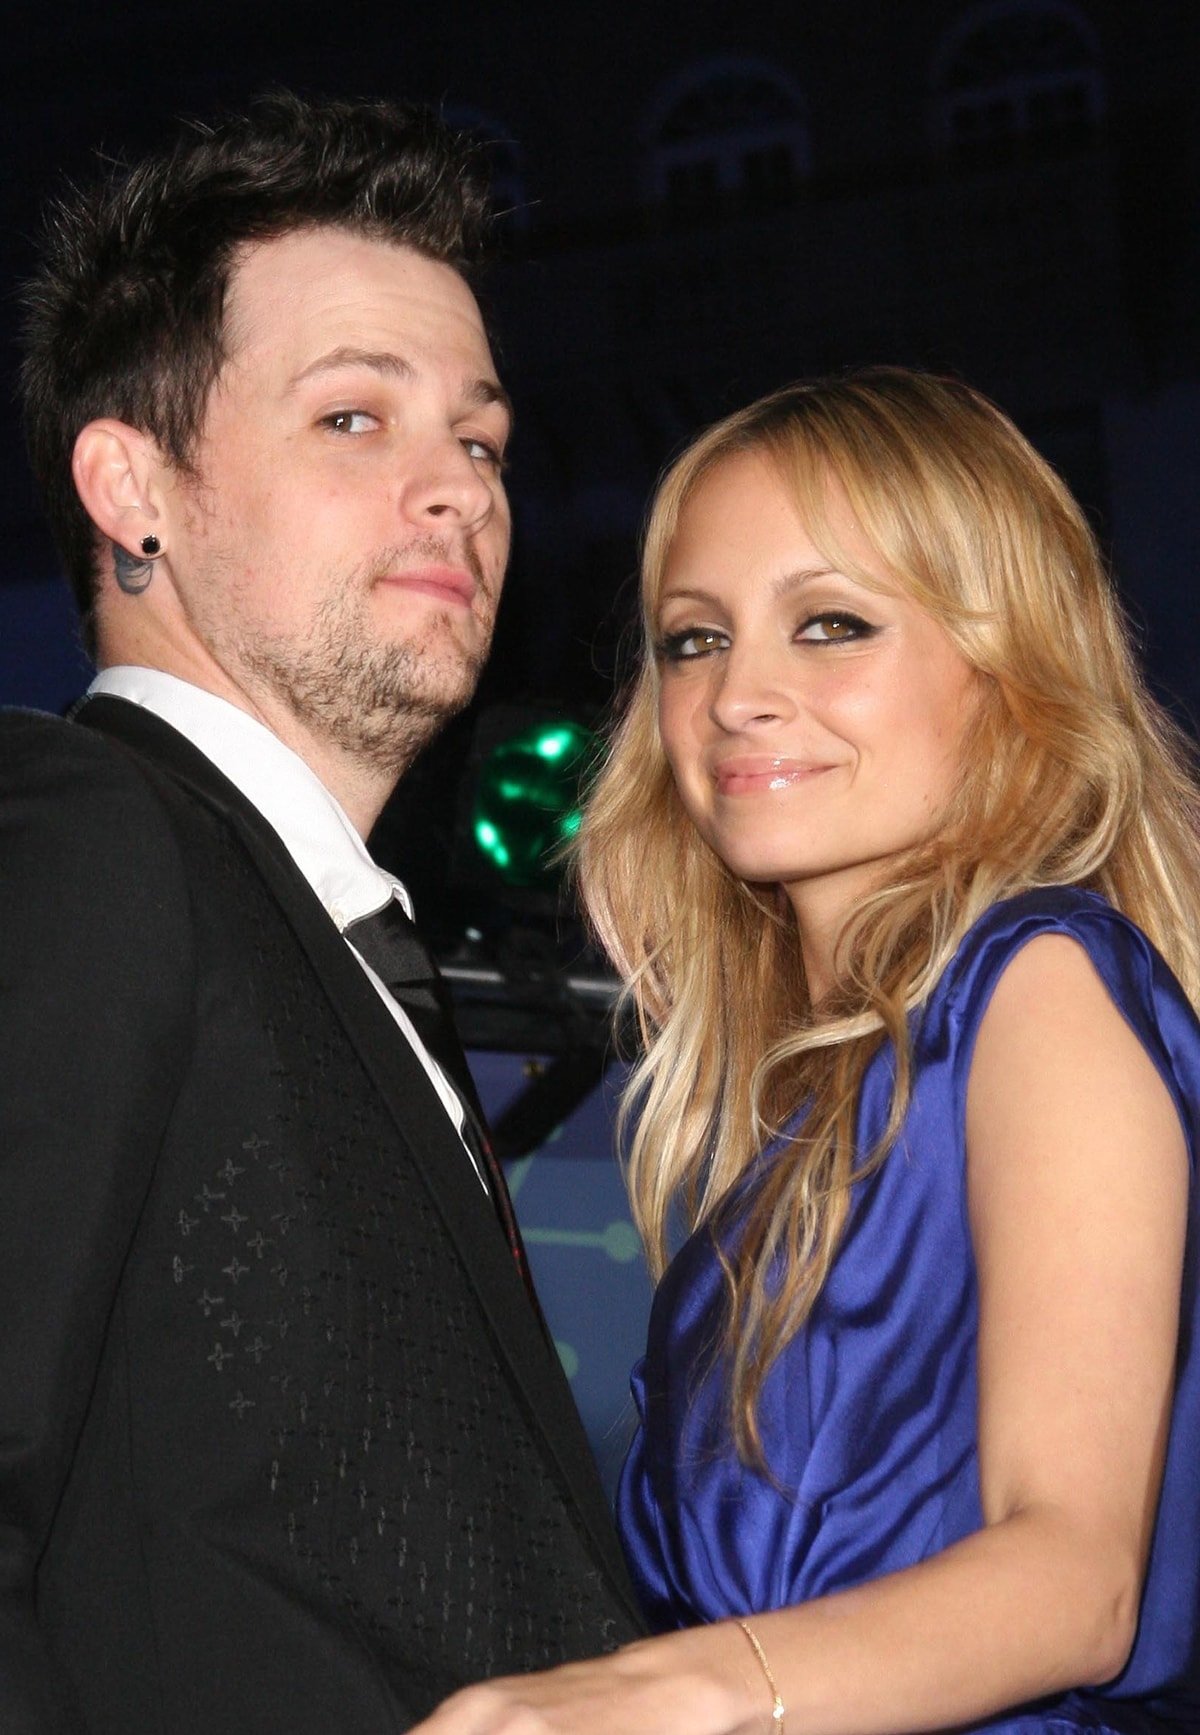 Joel Madden is notably taller than Nicole Richie, standing at 5 feet 7 inches (170.2 cm) compared to her height of 5 feet 1 inch (154.9 cm), resulting in a noticeable height difference of approximately 6 inches (15.3 cm)